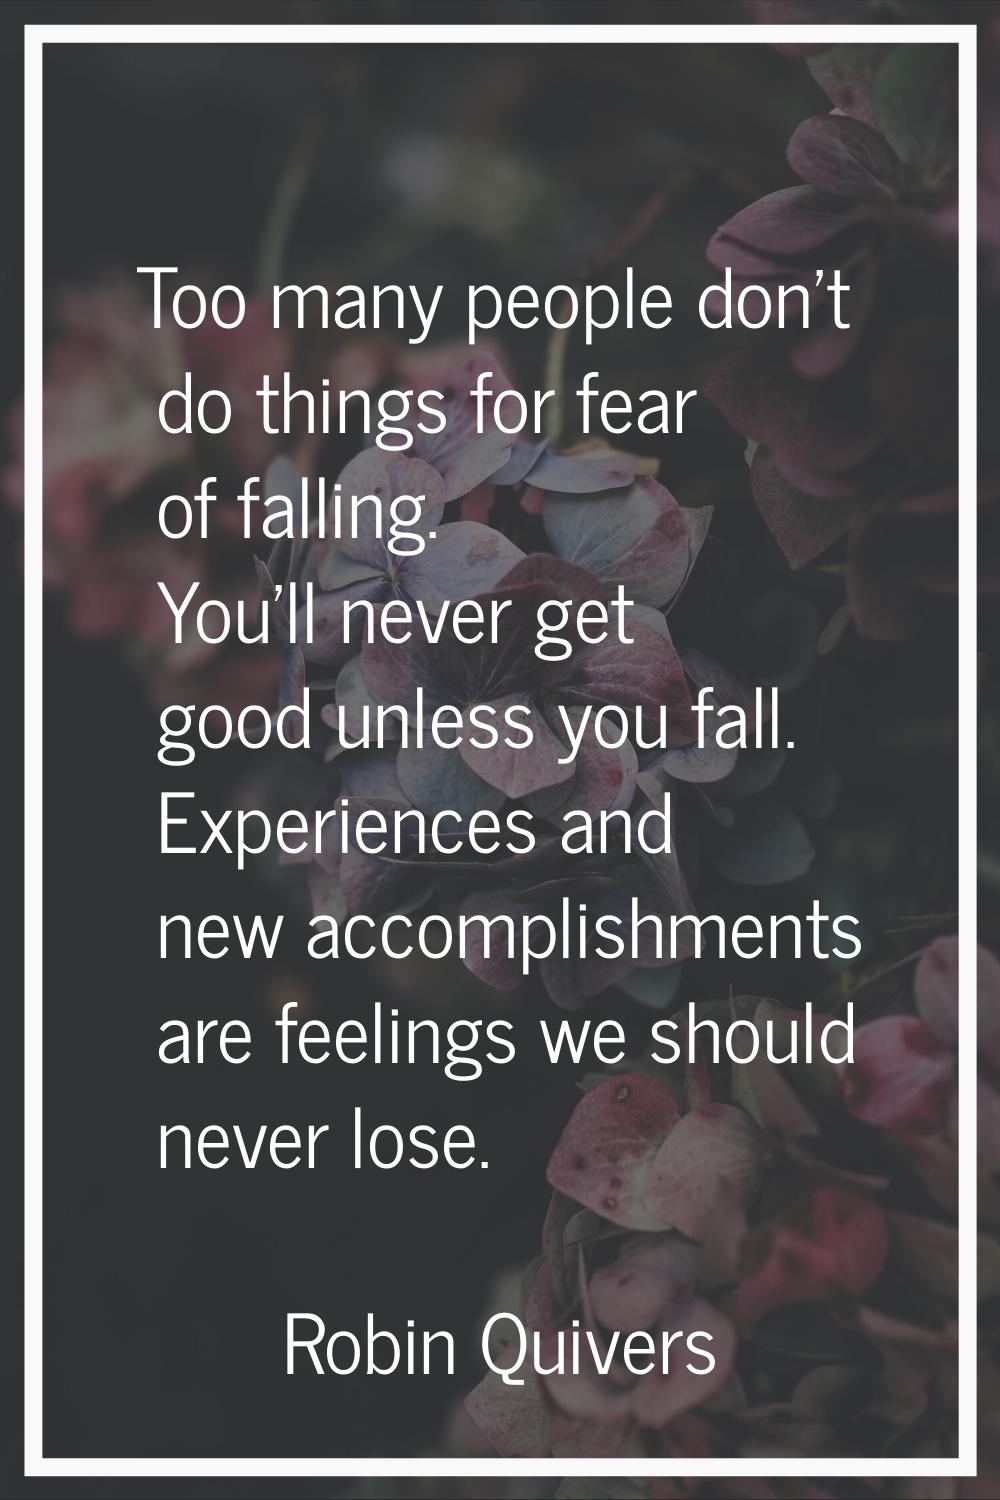 Too many people don't do things for fear of falling. You'll never get good unless you fall. Experie